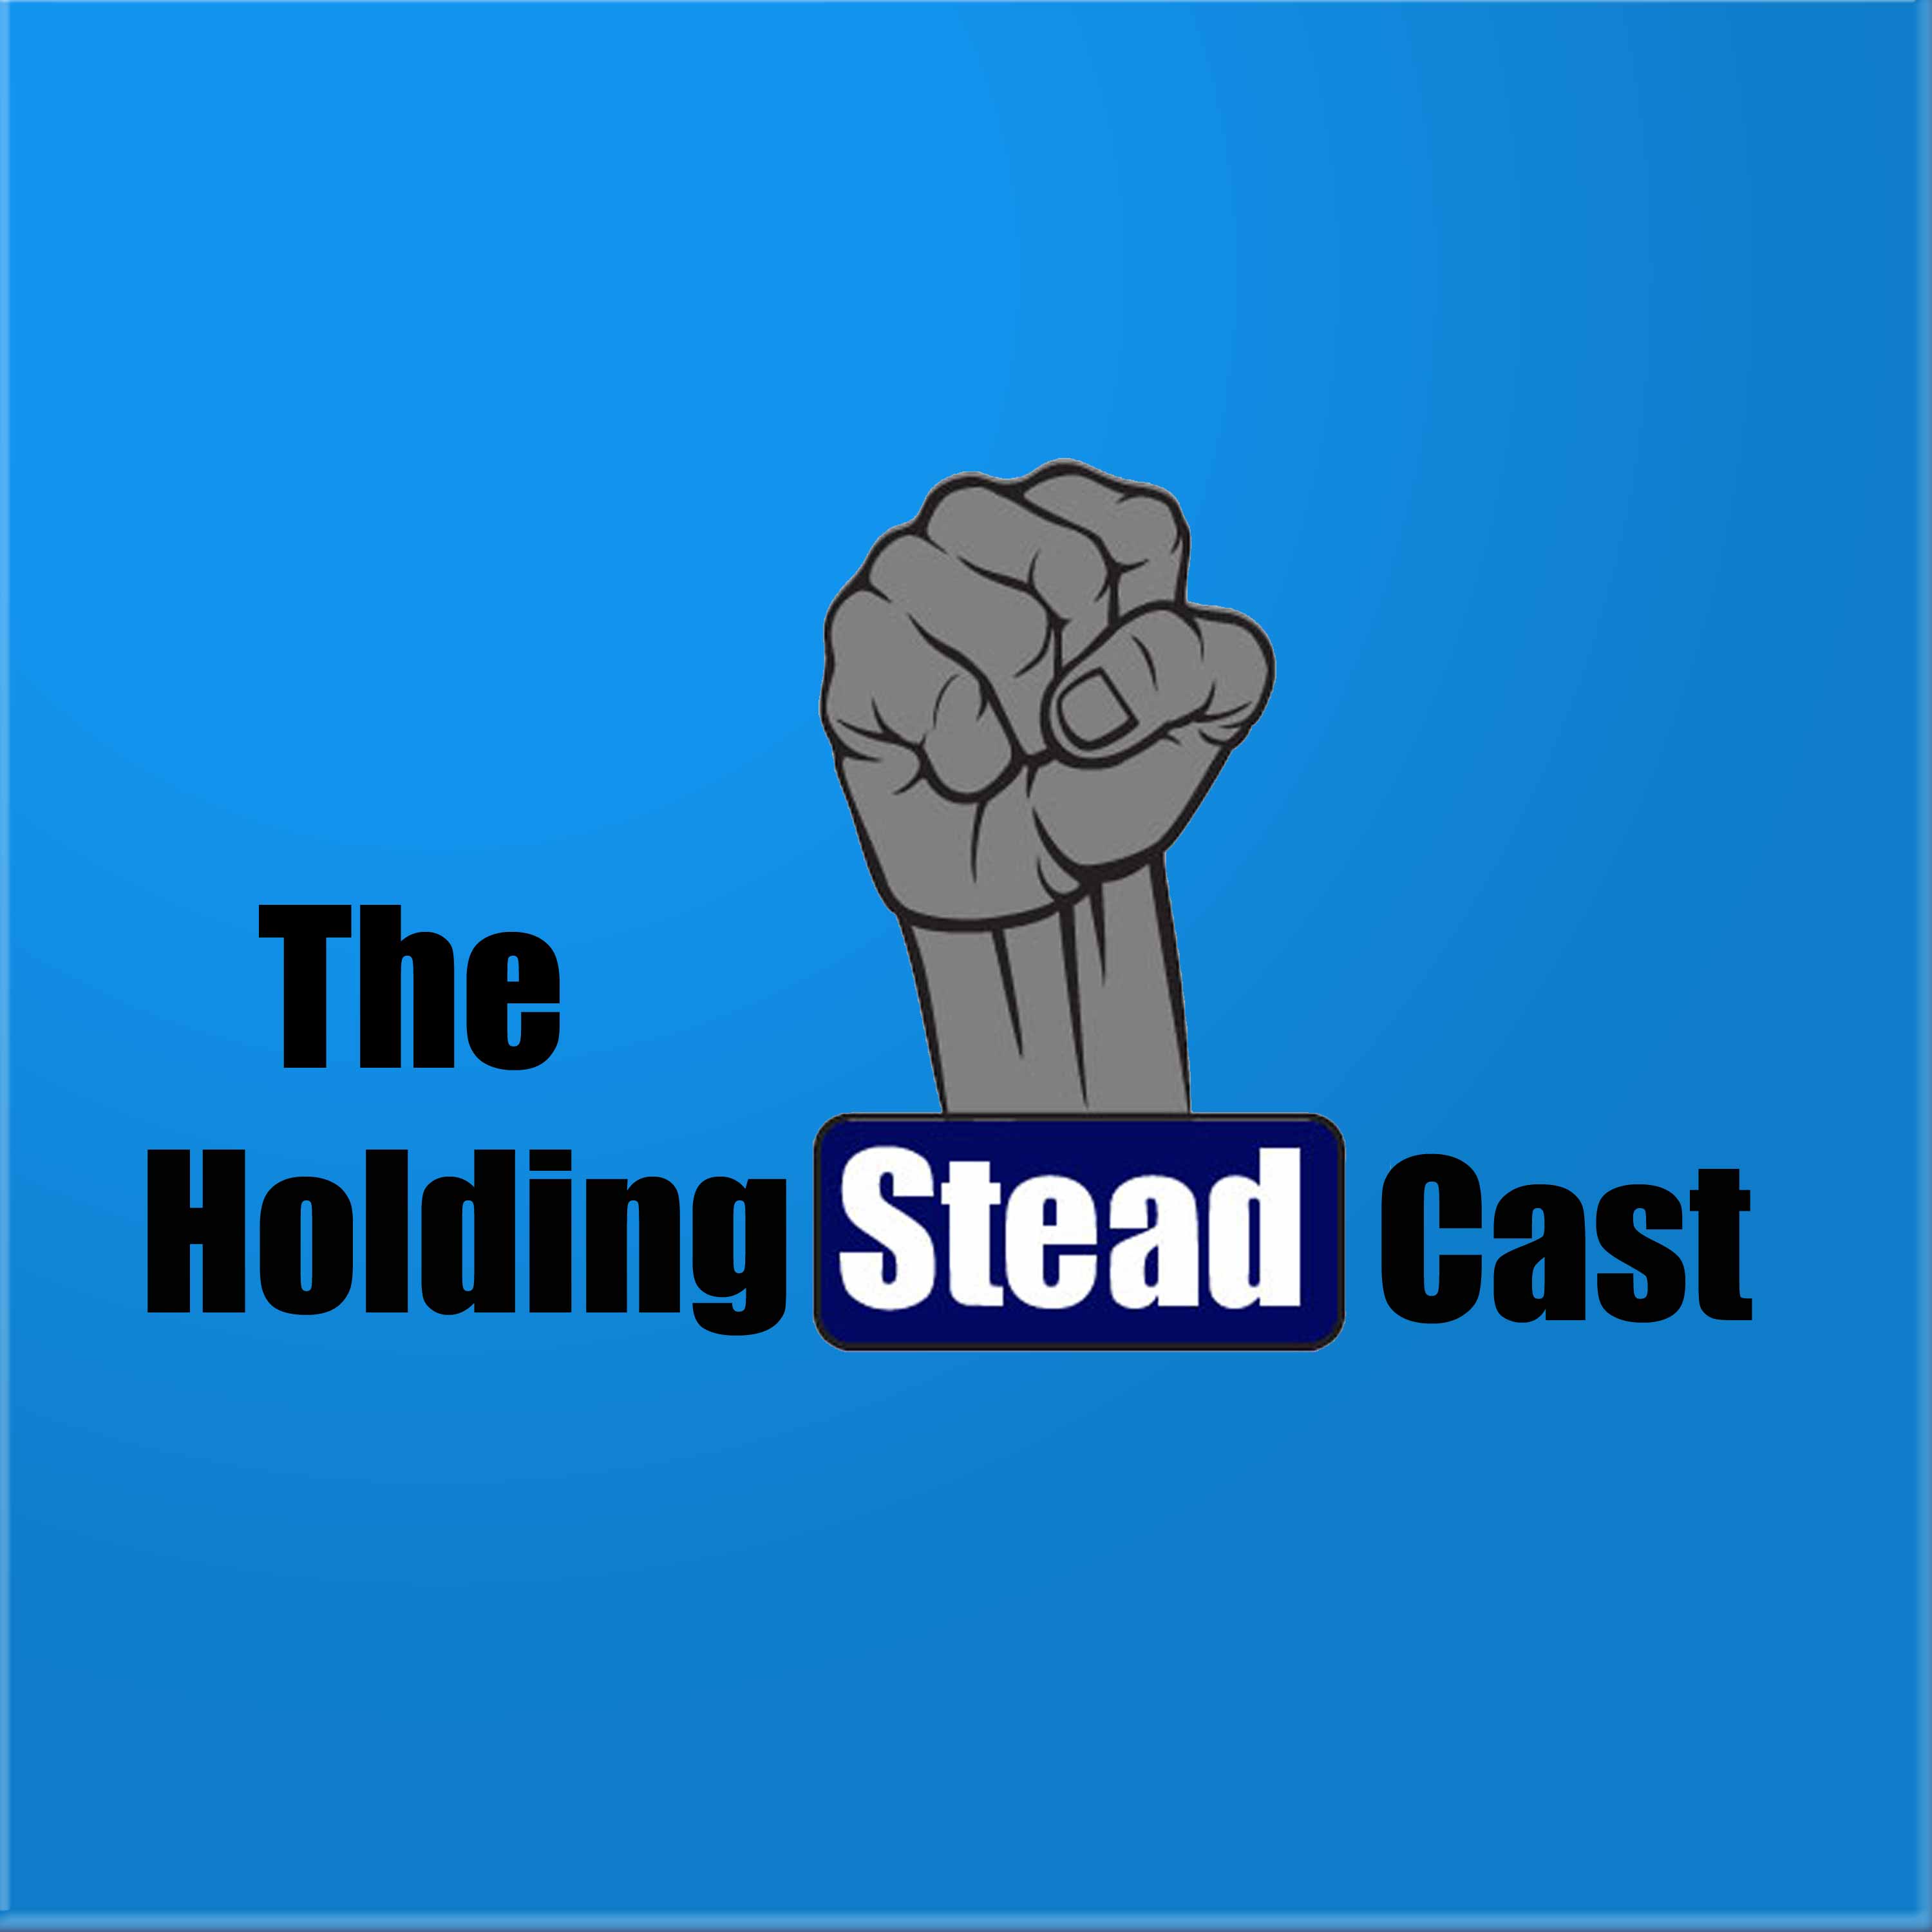 The Holding Steadcast